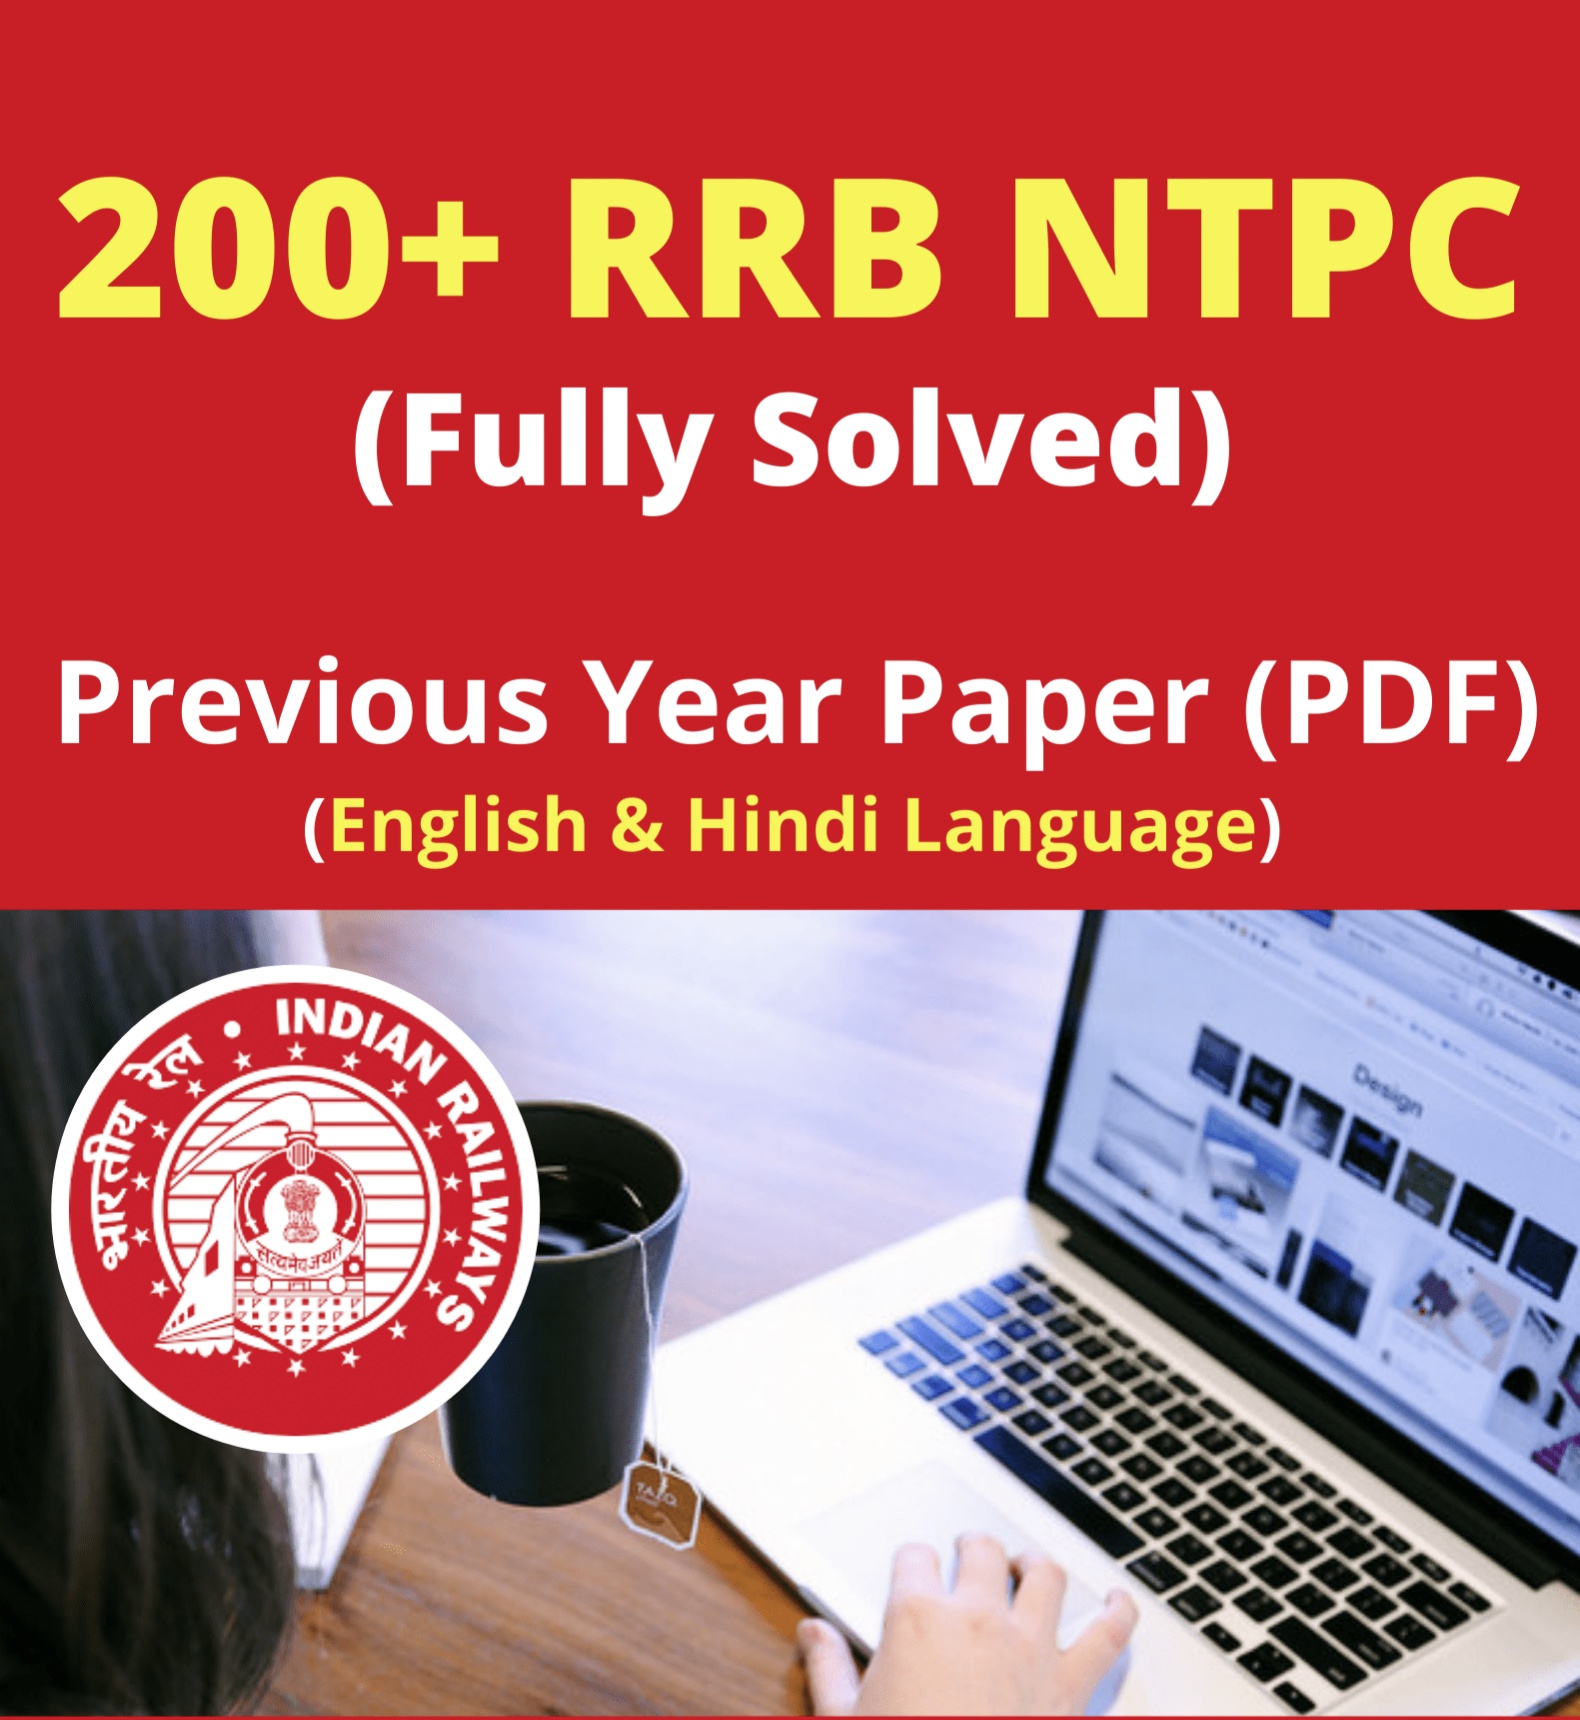 rrb-ntpc-all-previous-question-papers-with-solutions-in-one-pdf